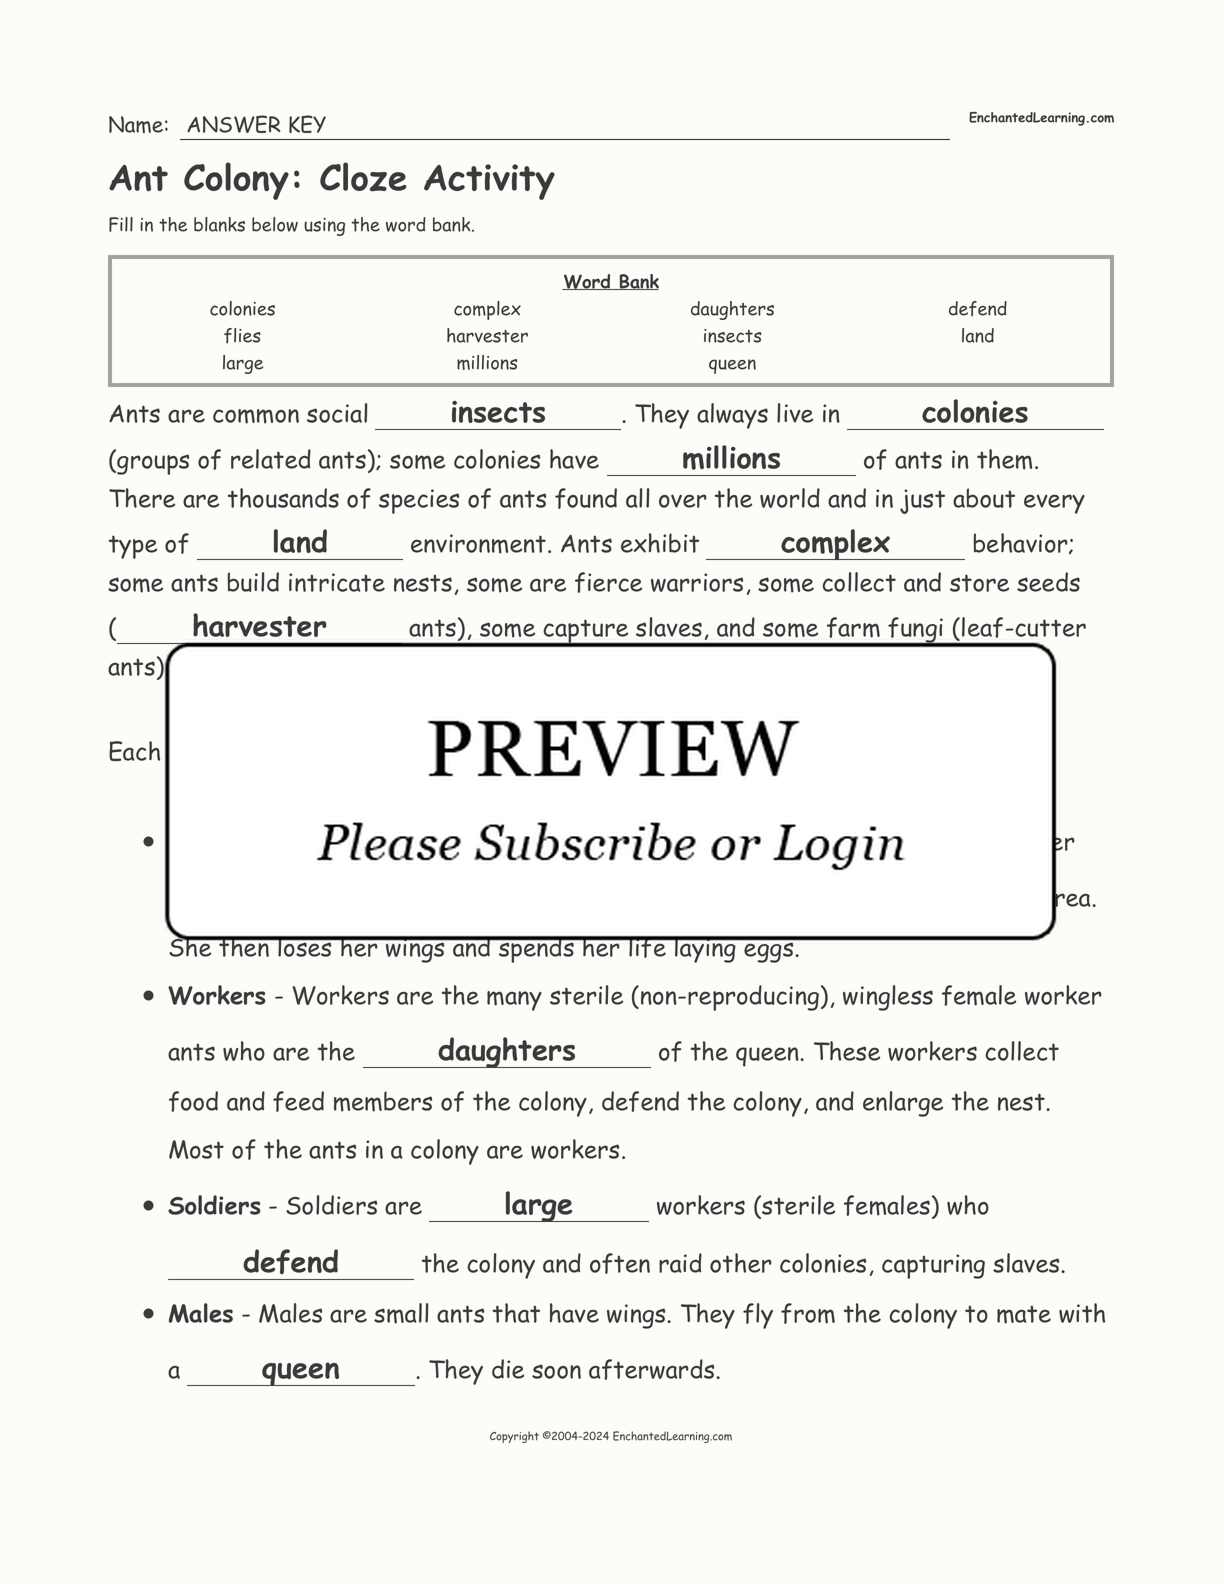 Ant Colony: Cloze Activity interactive worksheet page 2